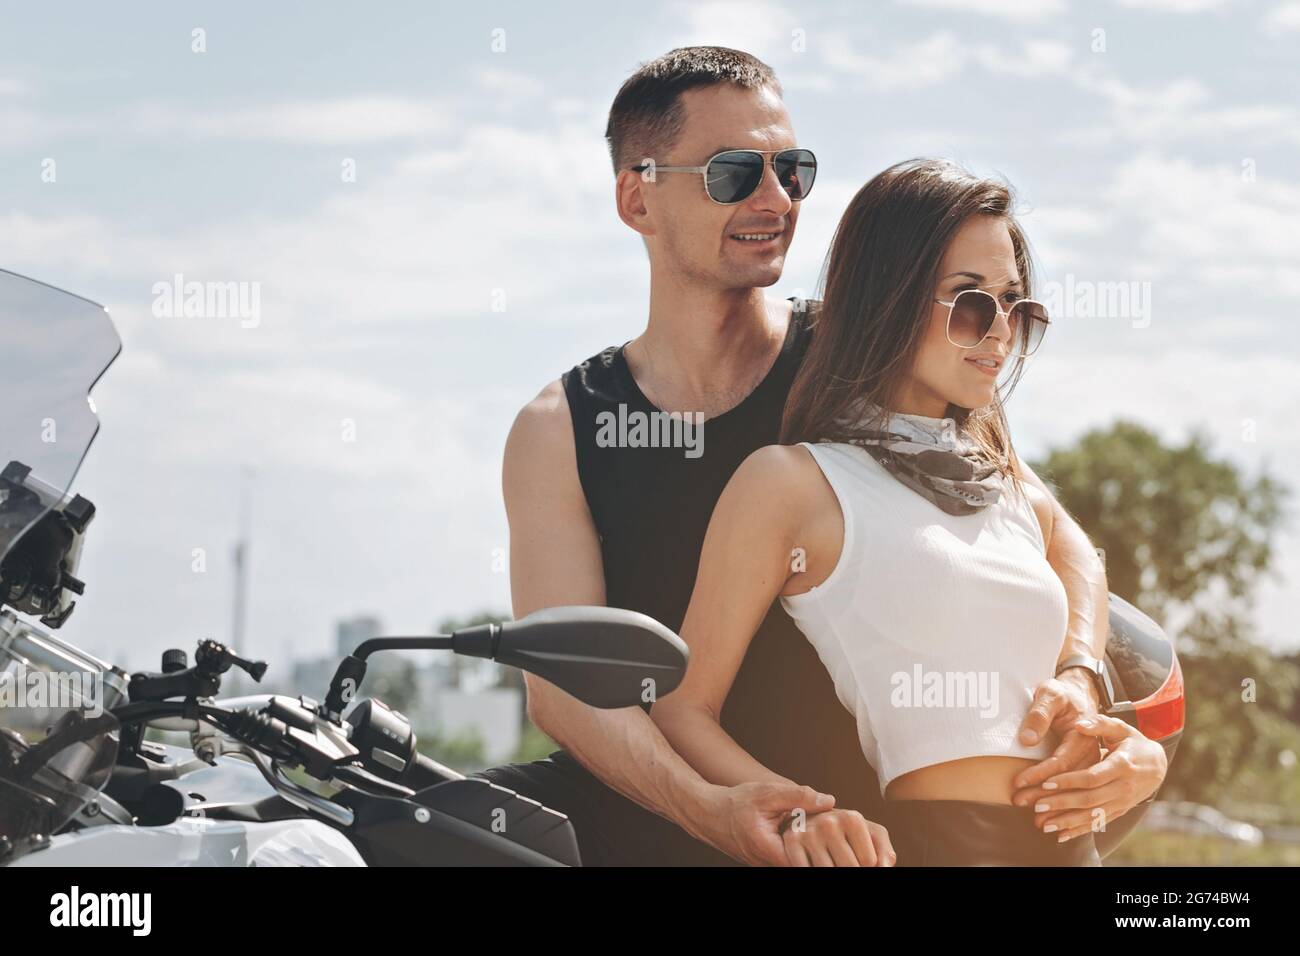 Cheerful smiling couple in love in sunglasses. Handsome man and pretty woman are hugging. Young attractive people are posing on the motorbike. Horizon Stock Photo